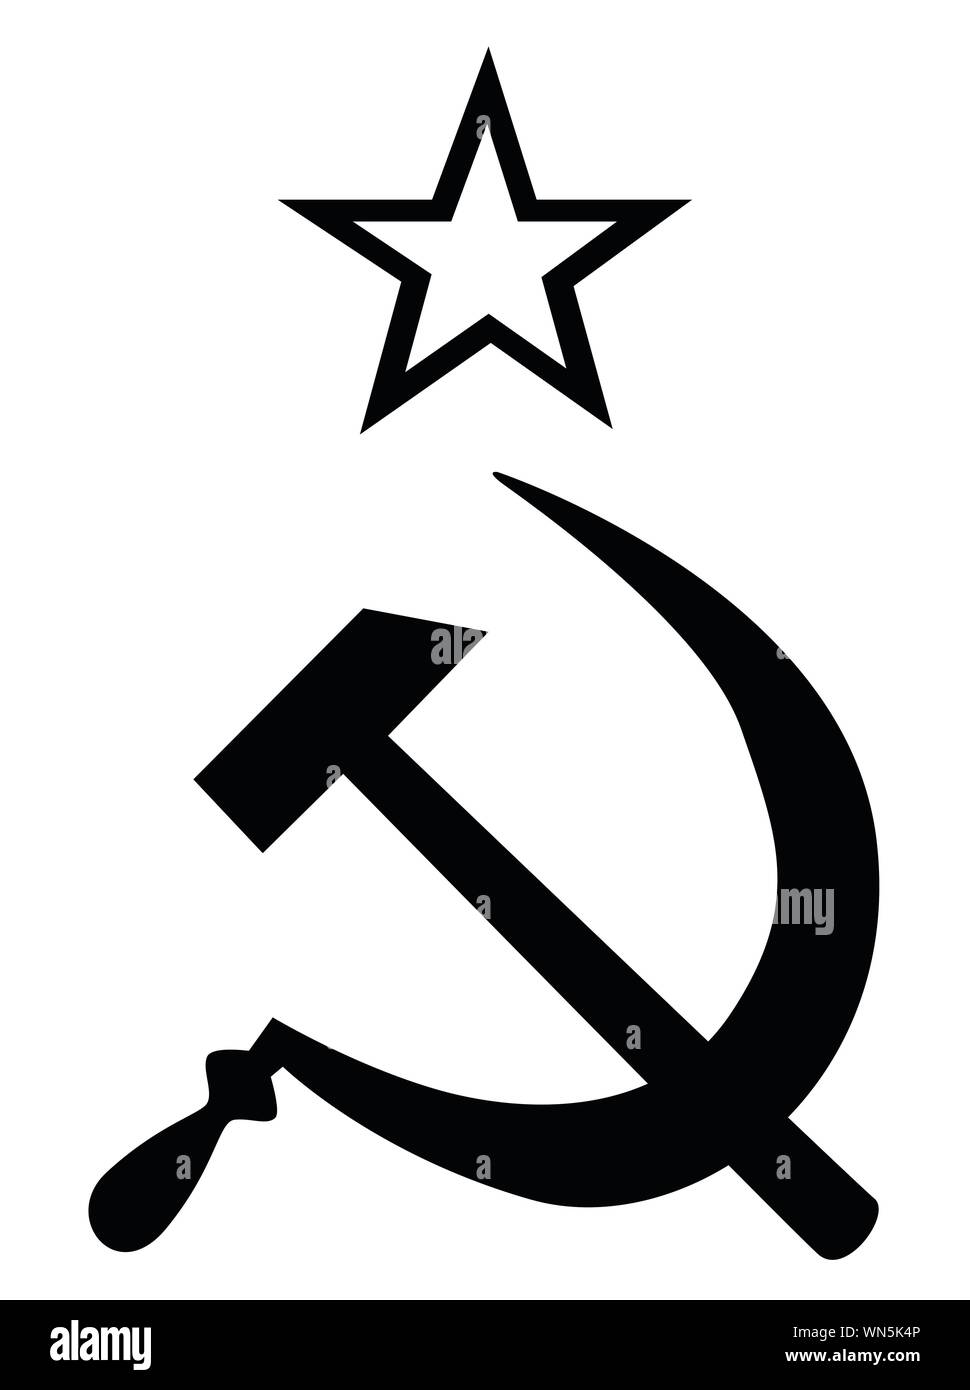 Hammer ans Sickle Black and White Stock Vector